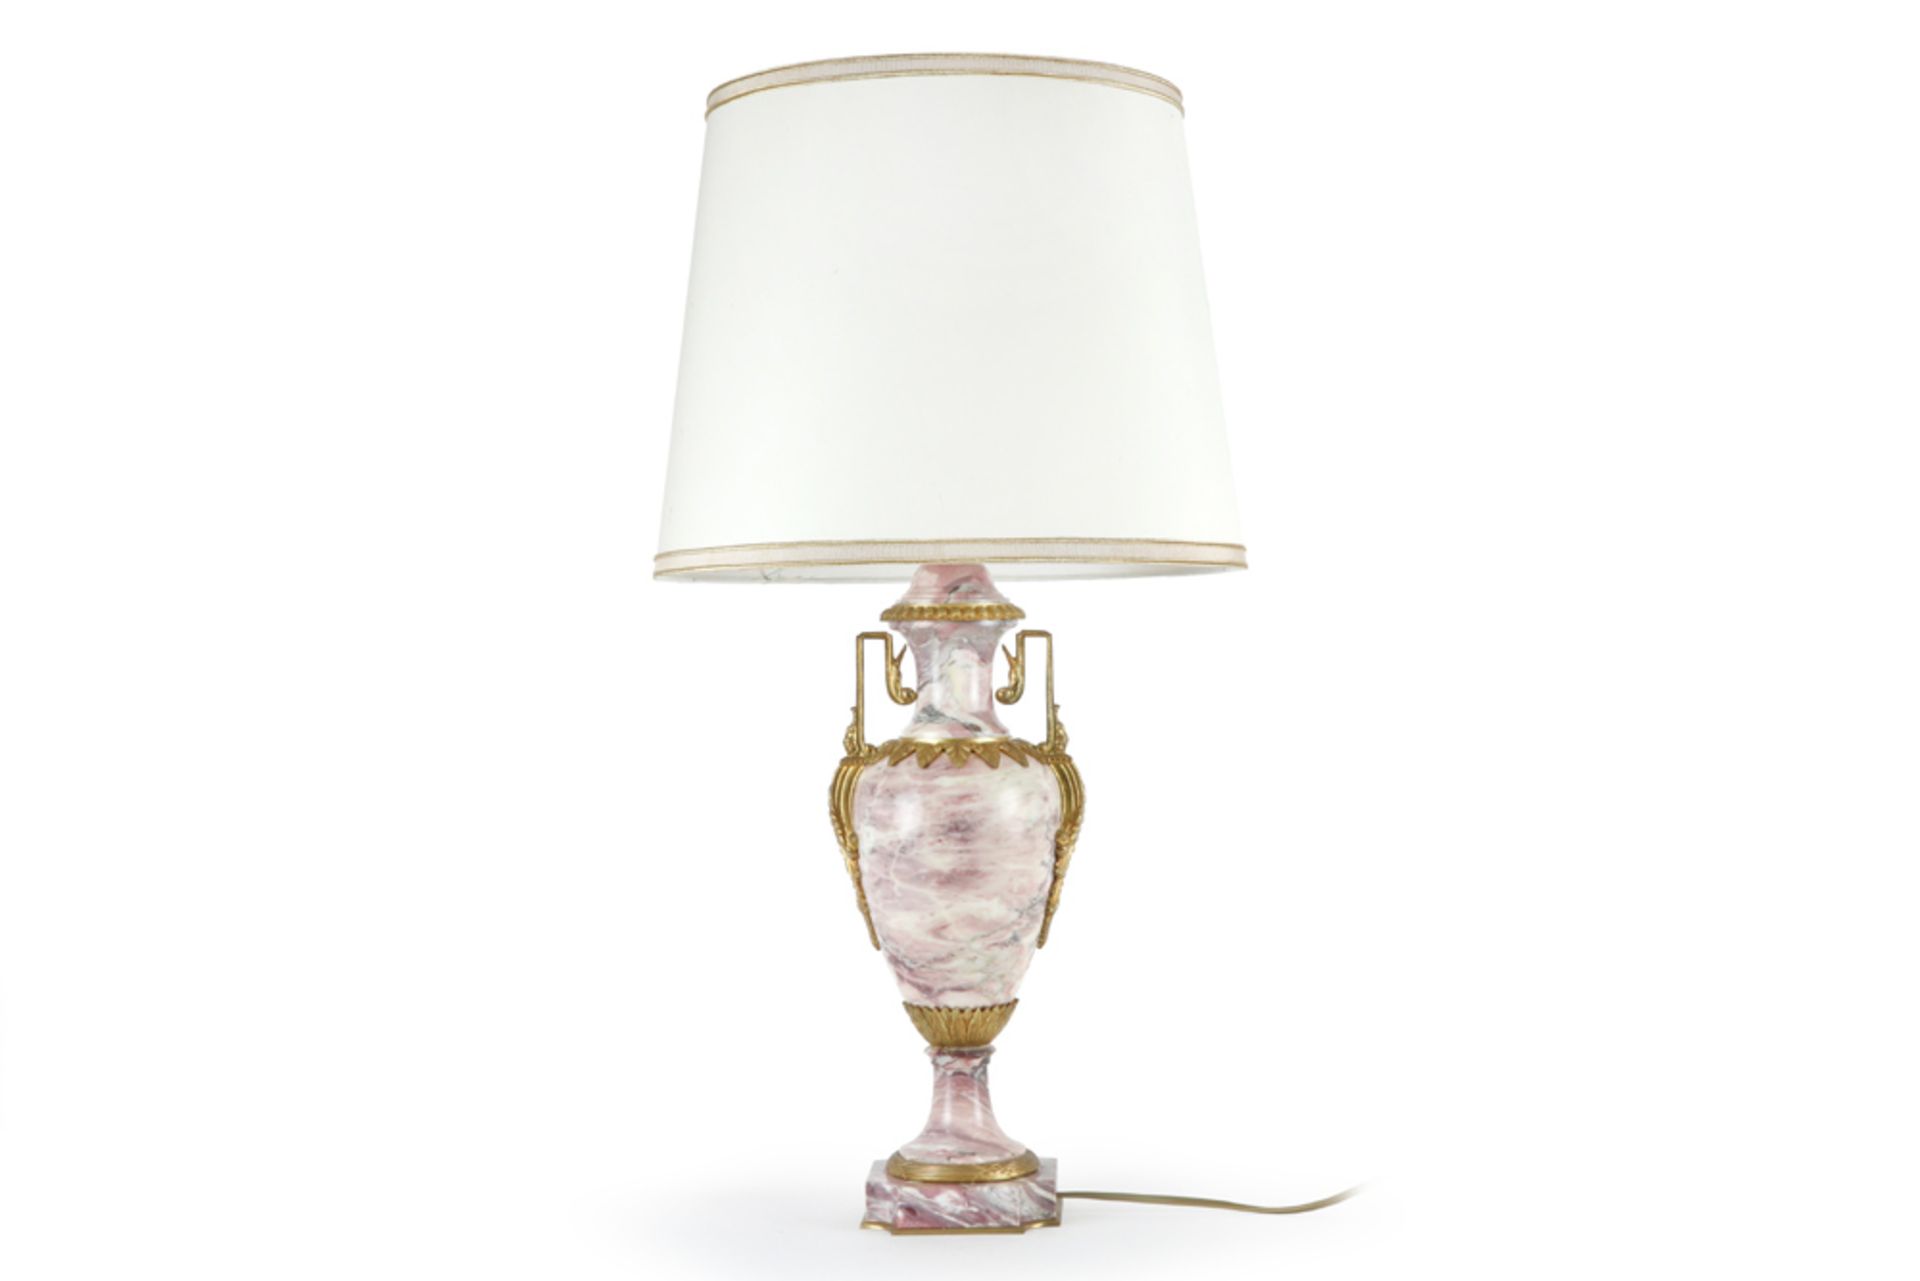 antique lidded vase in marble and gilded bronze, made into a lamp || Antieke cassoletvaas in - Image 2 of 2